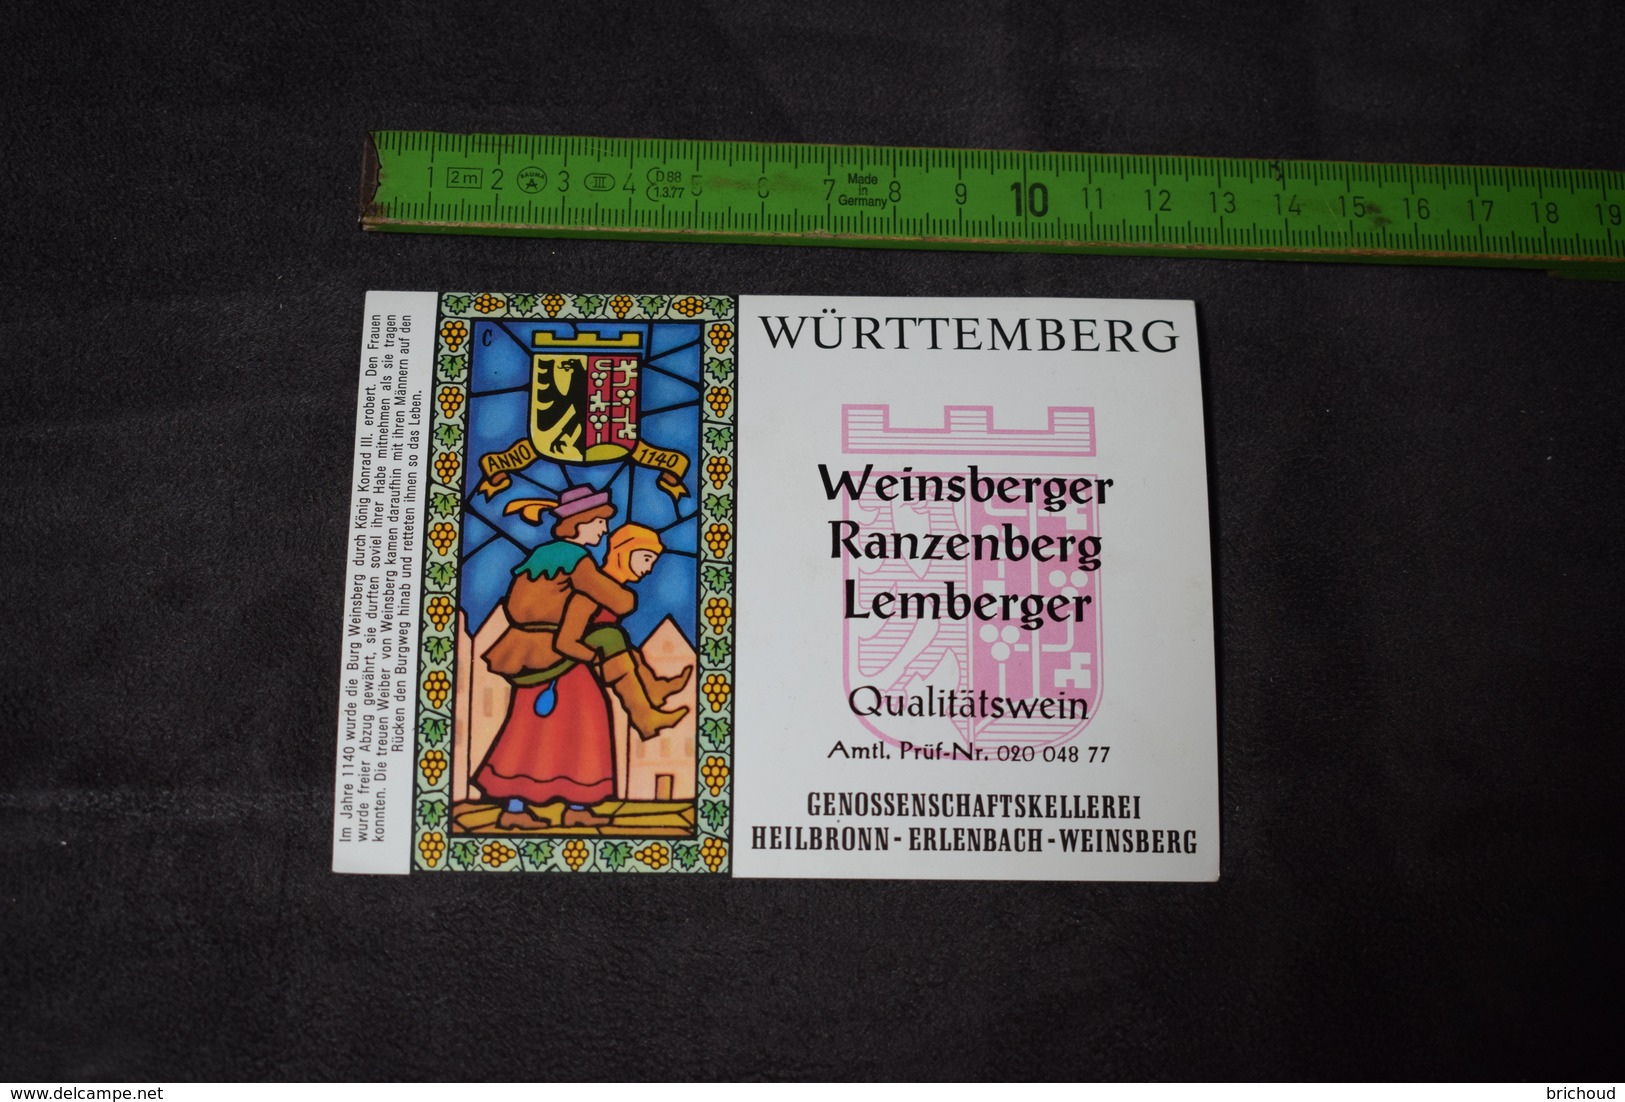 Württemberg Weinsberger Ranzenberg Lemberger Couples Vitraux Allemagne Germany - Couples